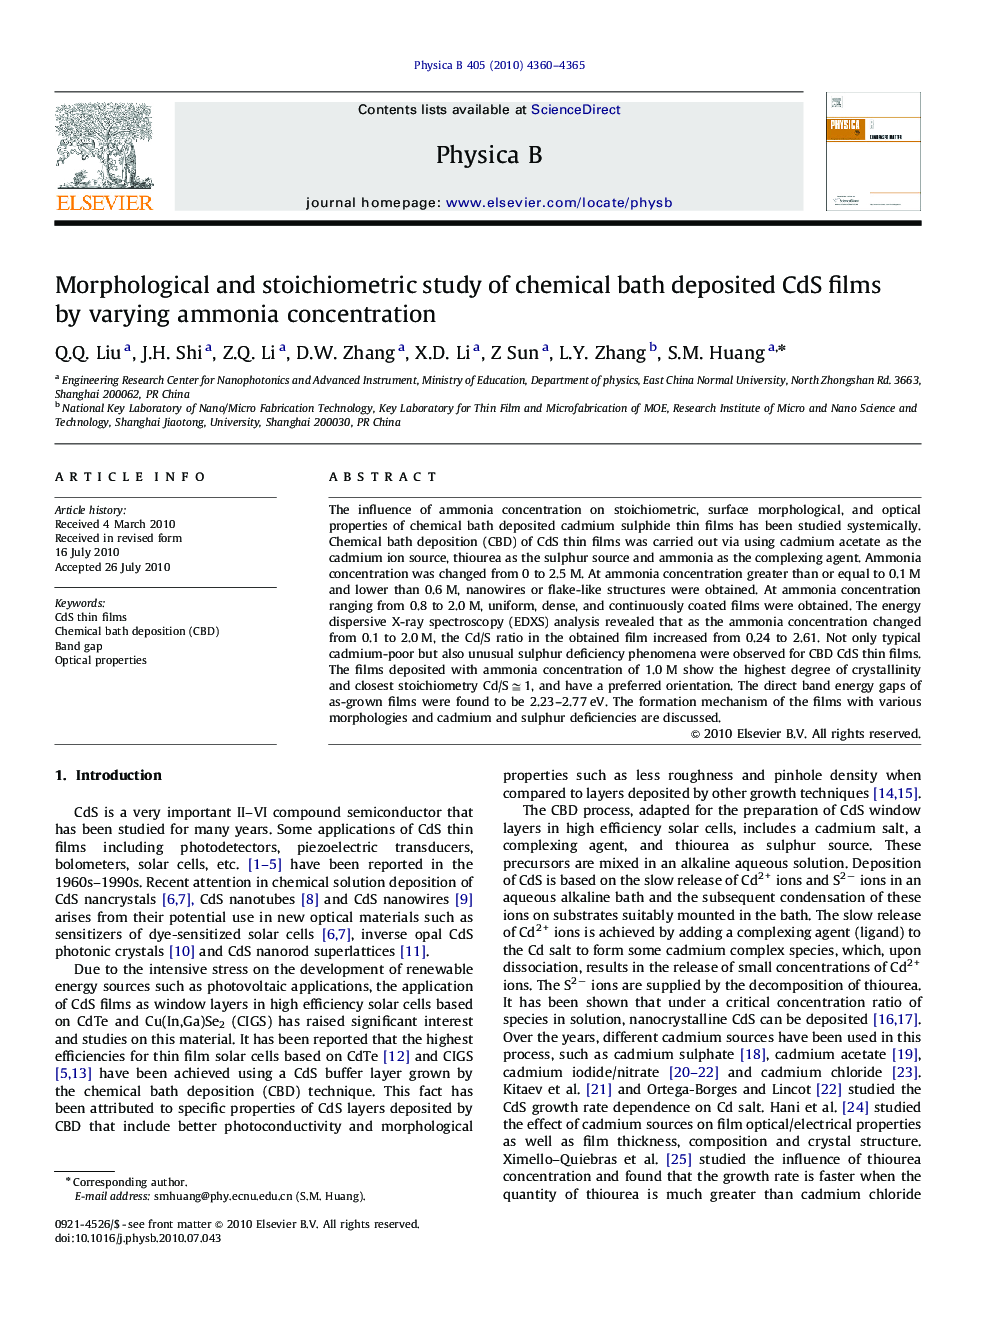 Morphological and stoichiometric study of chemical bath deposited CdS films by varying ammonia concentration